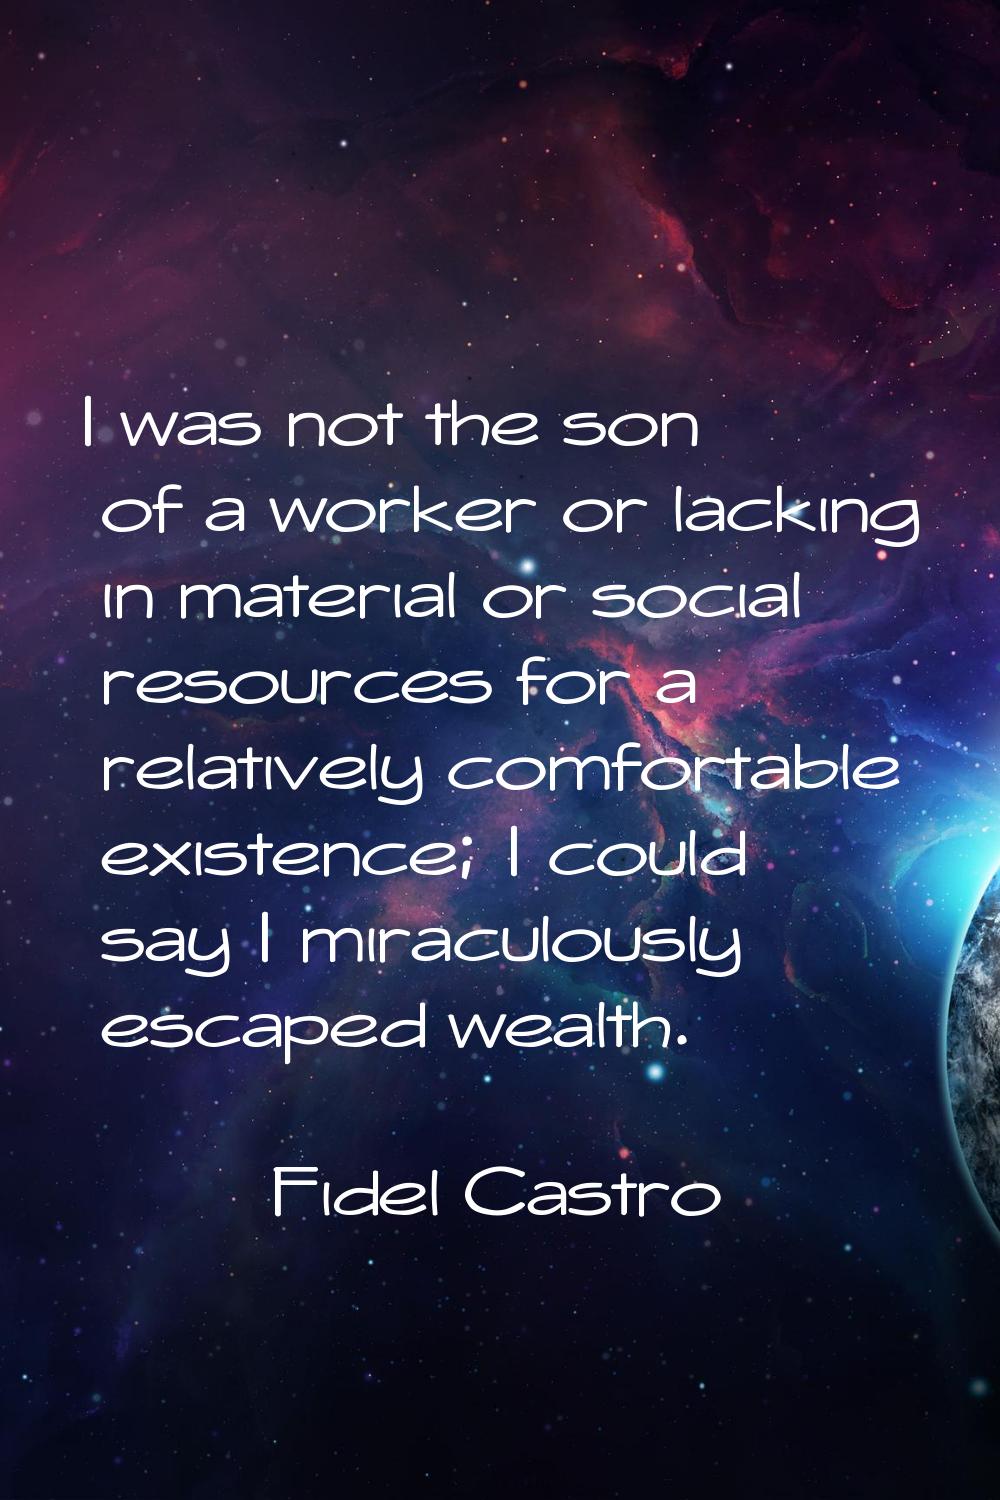 I was not the son of a worker or lacking in material or social resources for a relatively comfortab